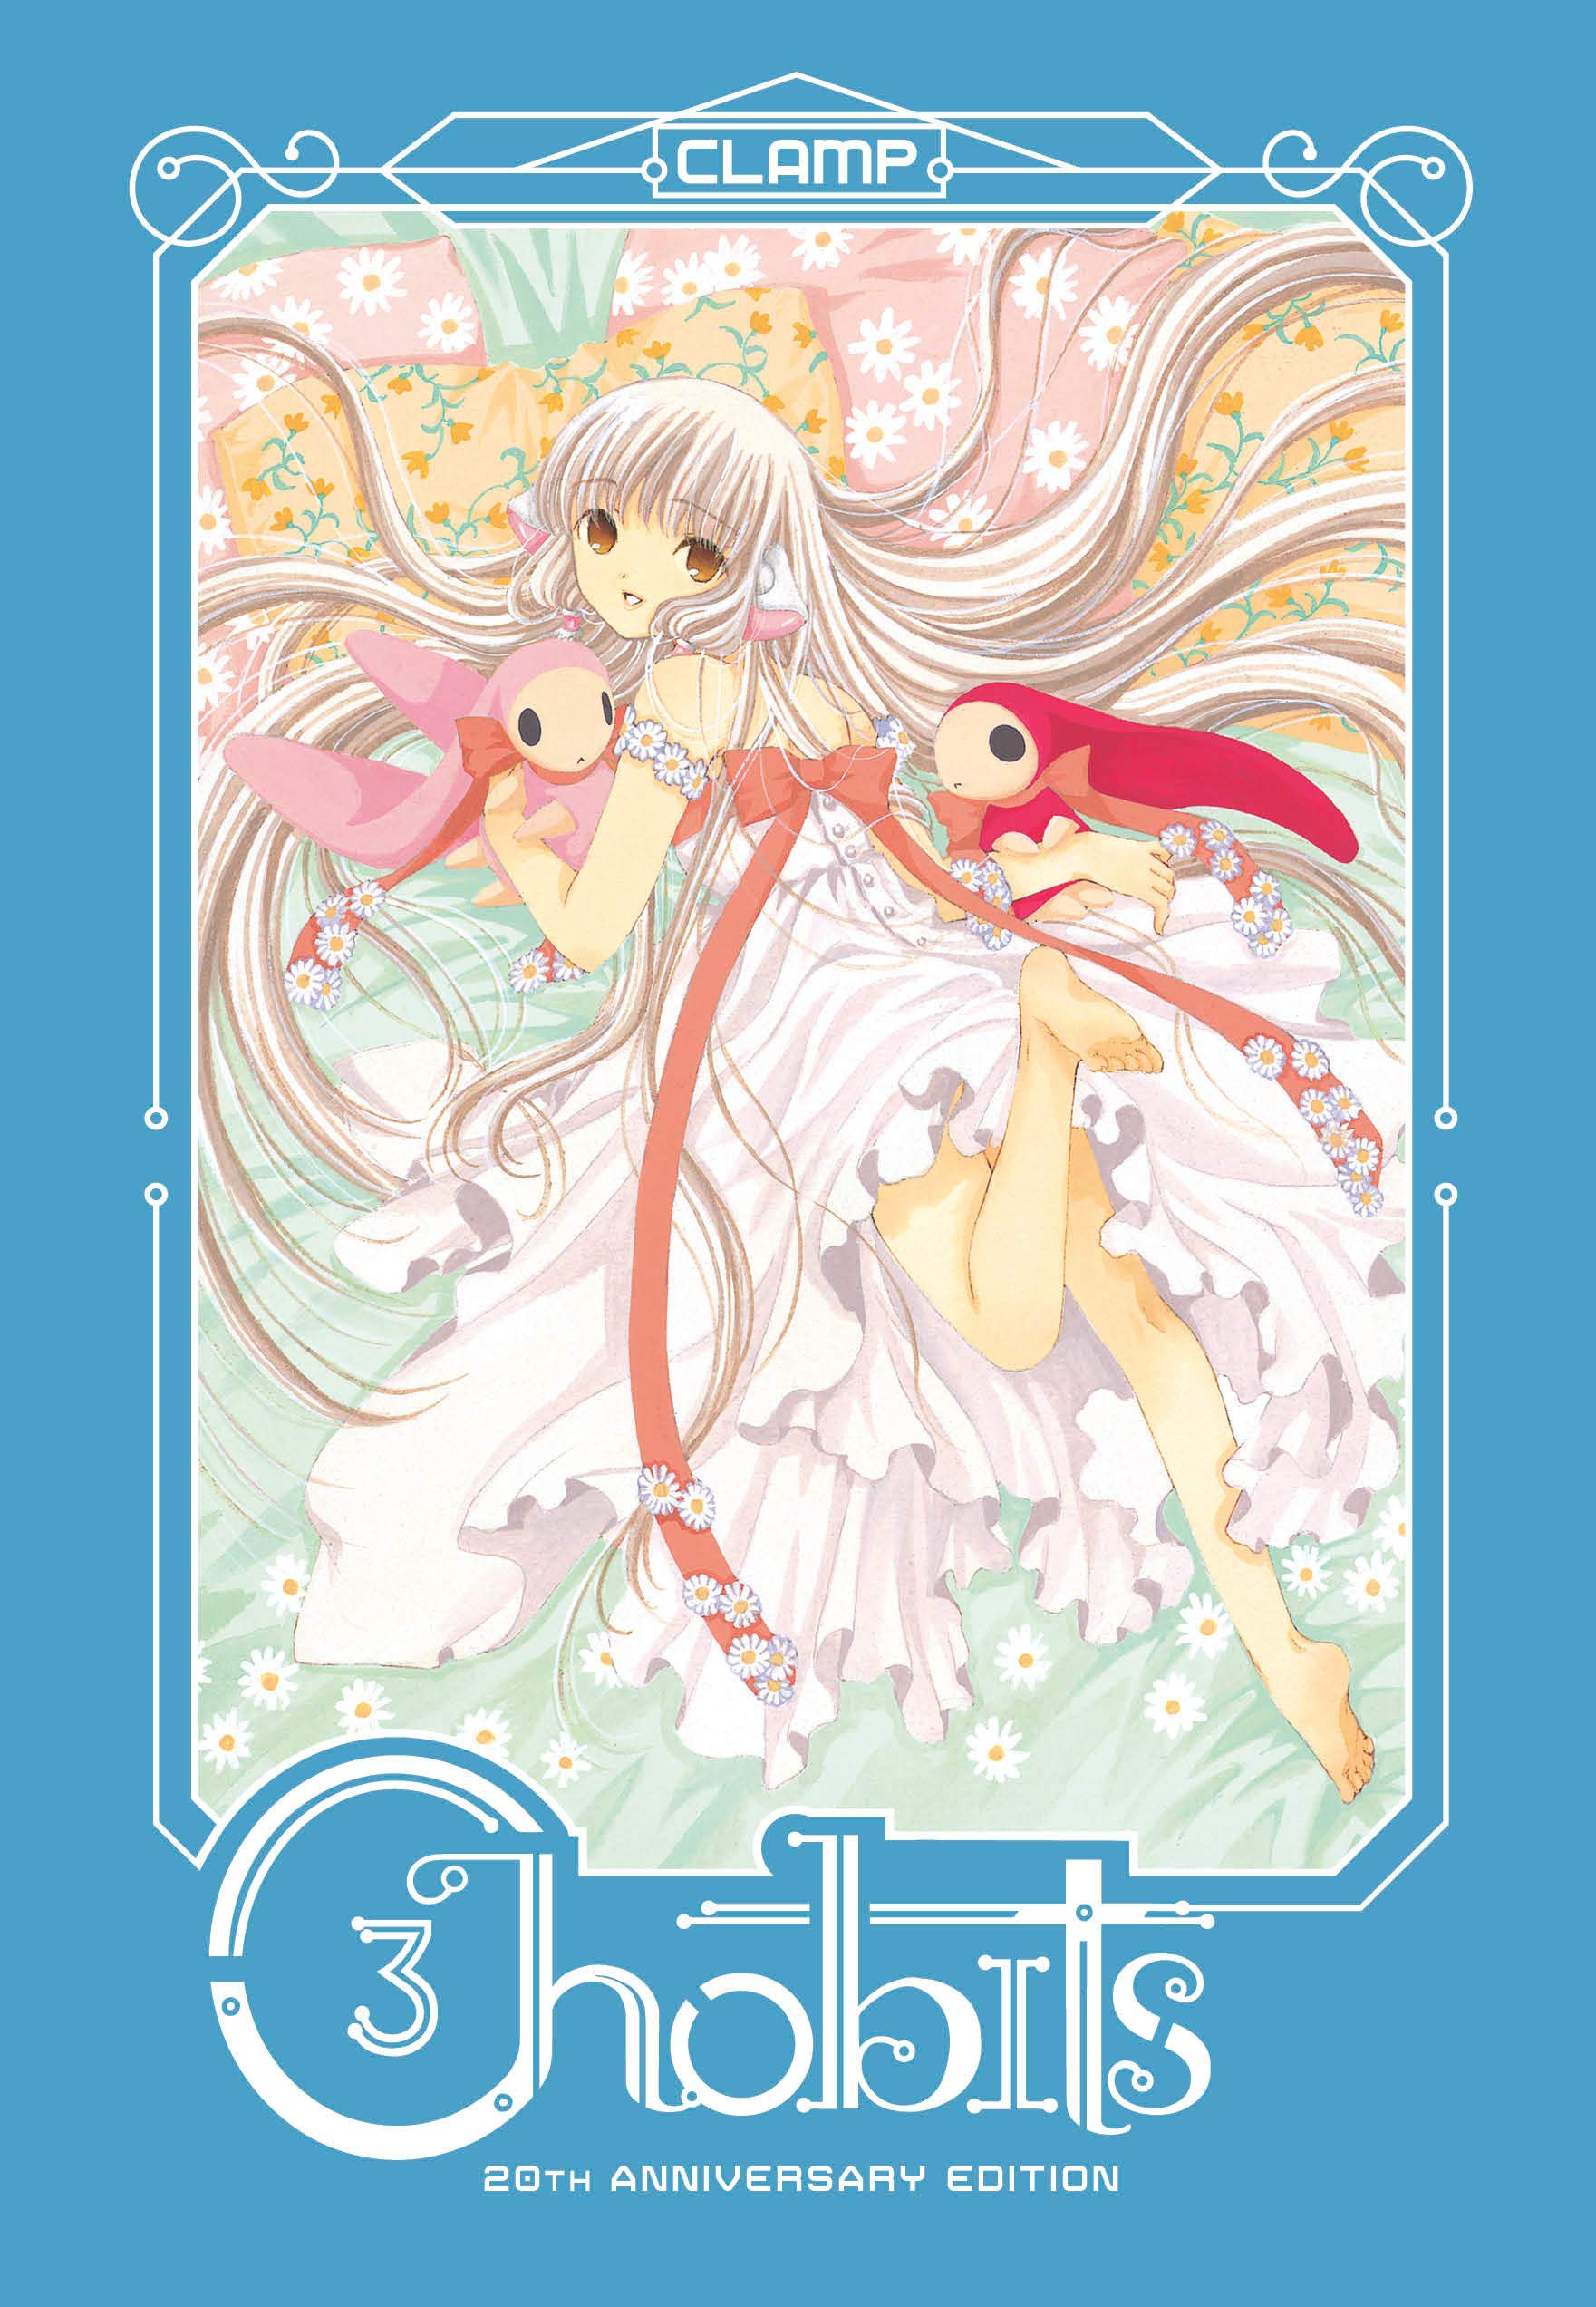 Chobits 20th Anniversary Edition Hardcover Volume 3